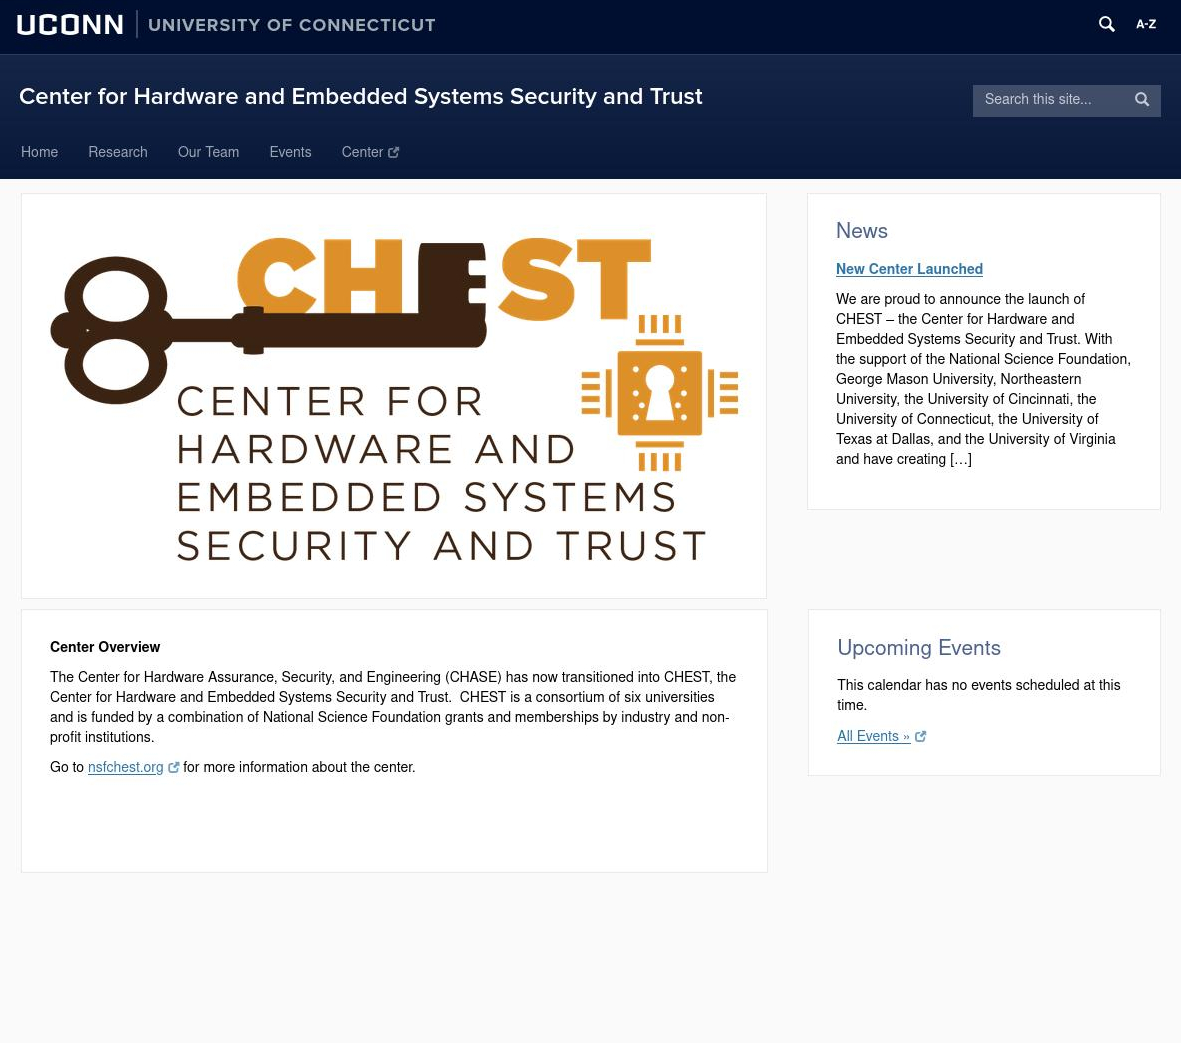  Center for Hardware and Embedded Systems Security and Trust